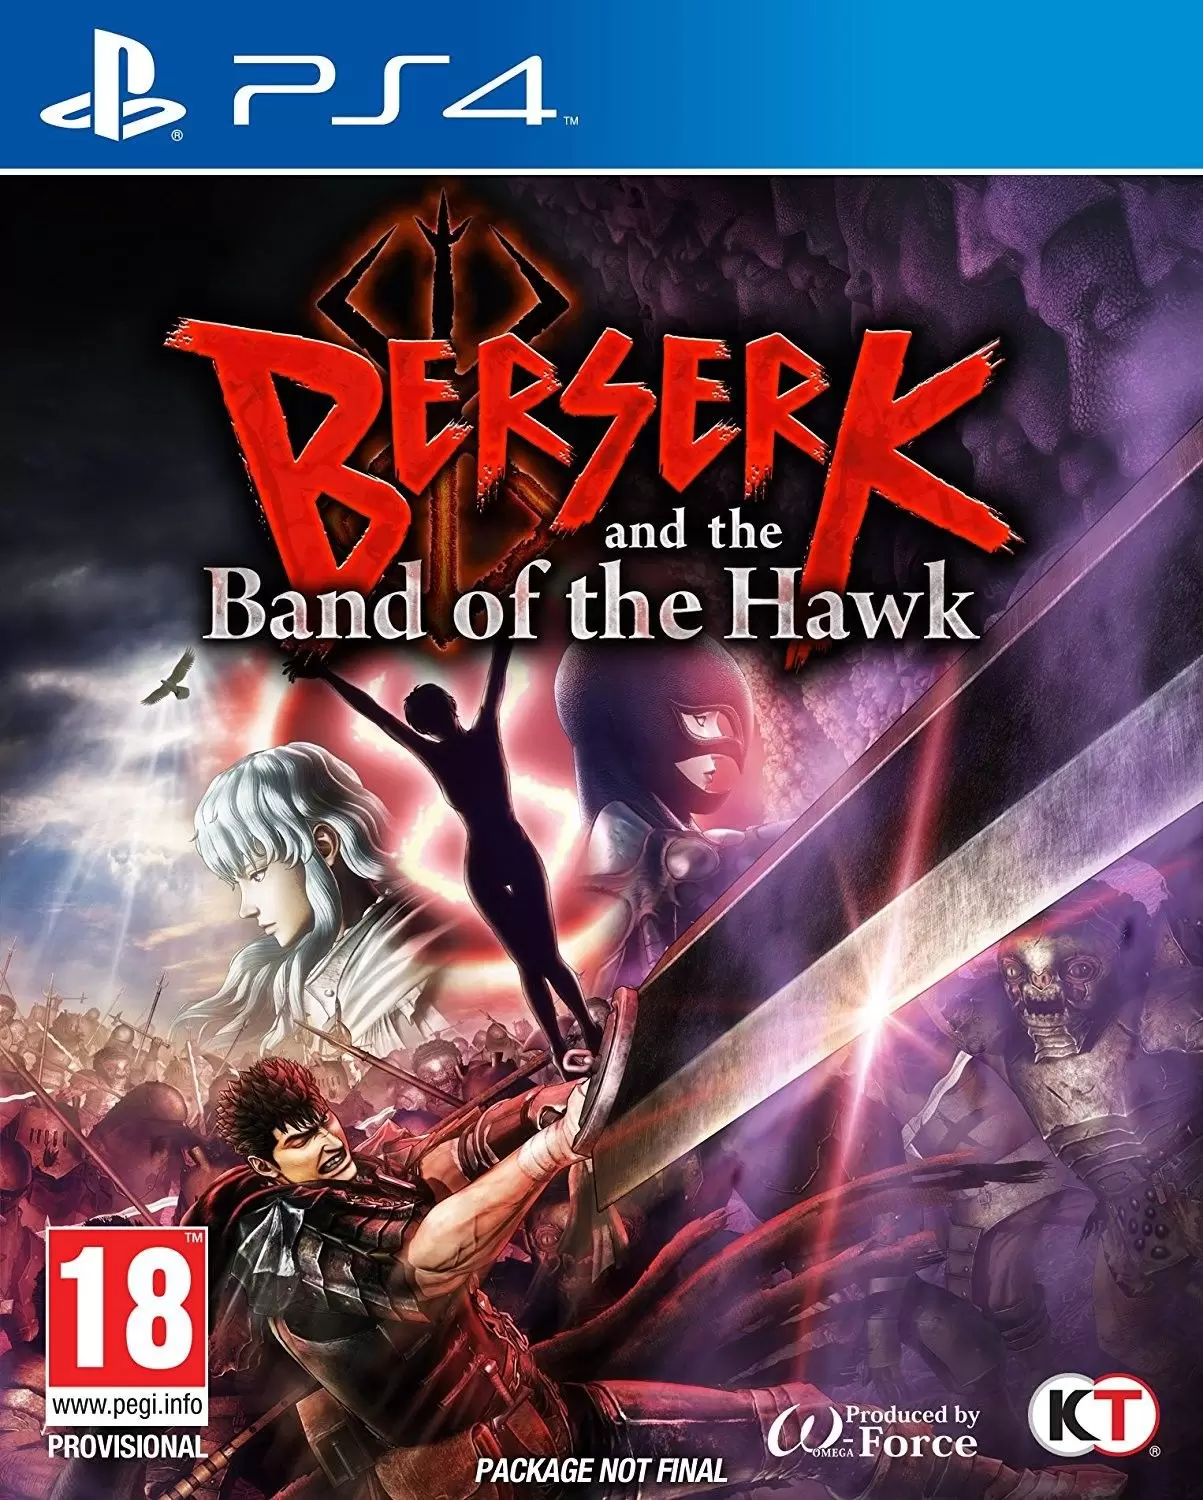 PS4 Games - Berserk and the Band of the Hawk